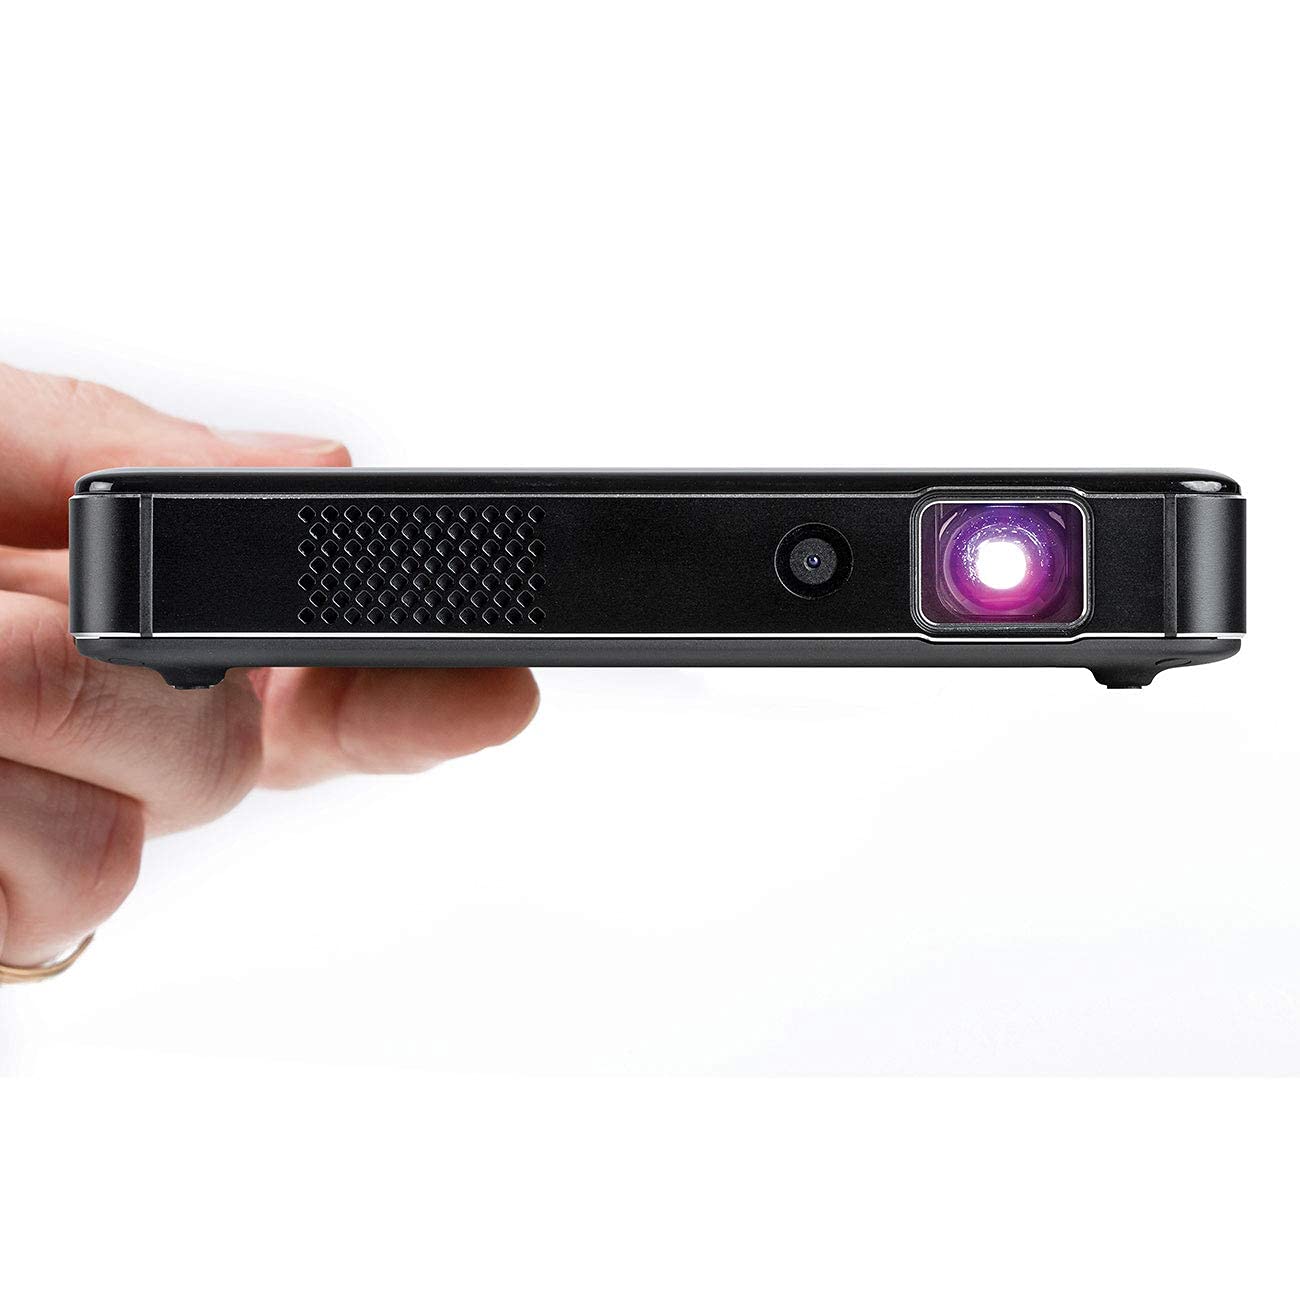 Miroir M220 HD Pro Portable LED Projector |Auto Focus |USB – C Charge & Video |Up to 2 Hour Rechargeable Battery |Native Resolution 1280 x 720p | Supports 1080p Input